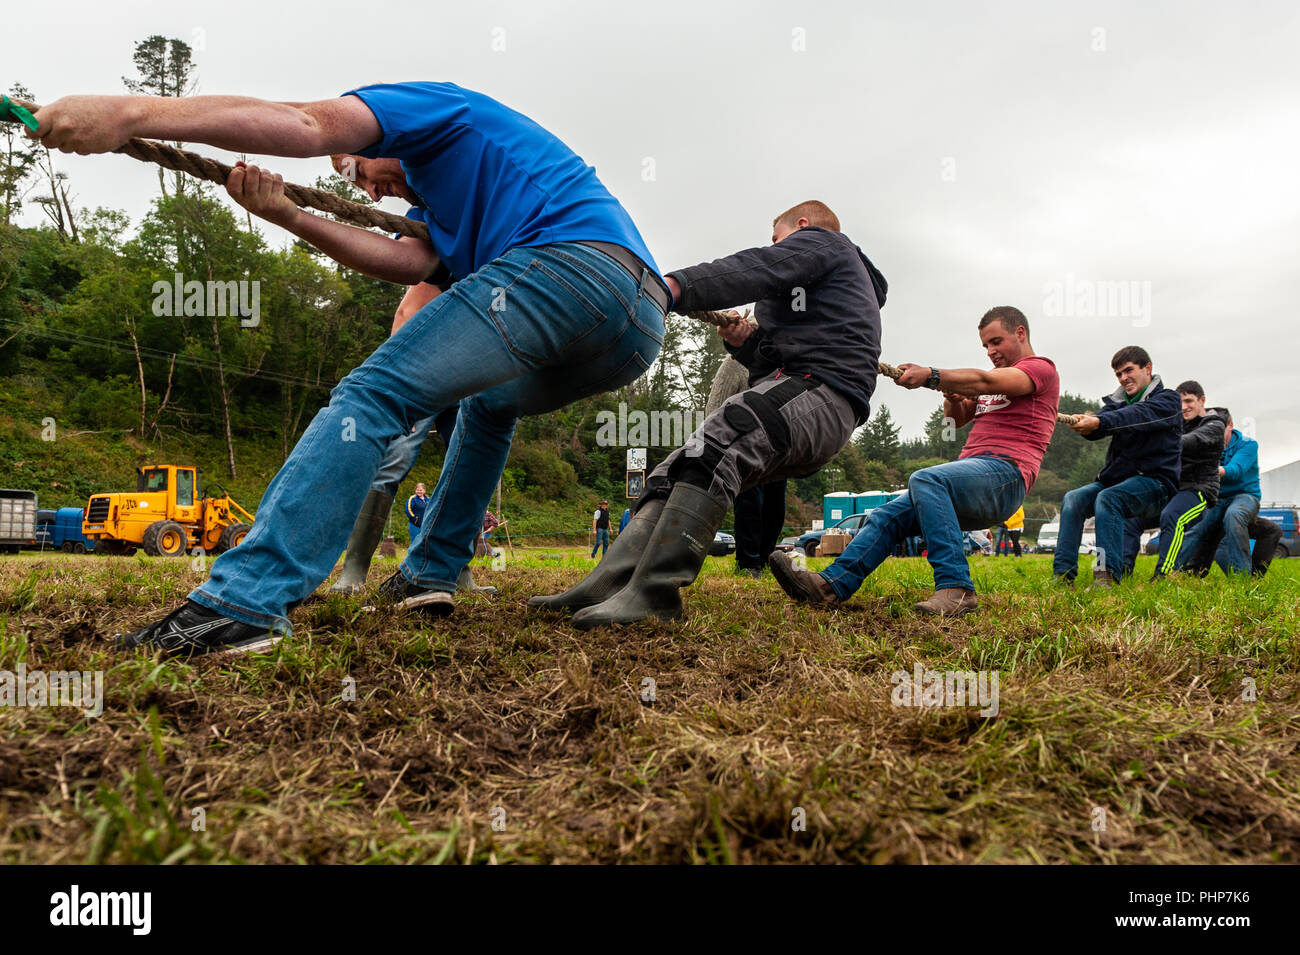 Bantry, West Cork, Ireland. 2nd Sept, 2018. Bantry Agricultural Show is taking place at the Bantry Airstrip today in appalling weather. One of the last events of the show was the hotly contested Tug-O-War. Credit: Andy Gibson/Alamy Live News Stock Photo